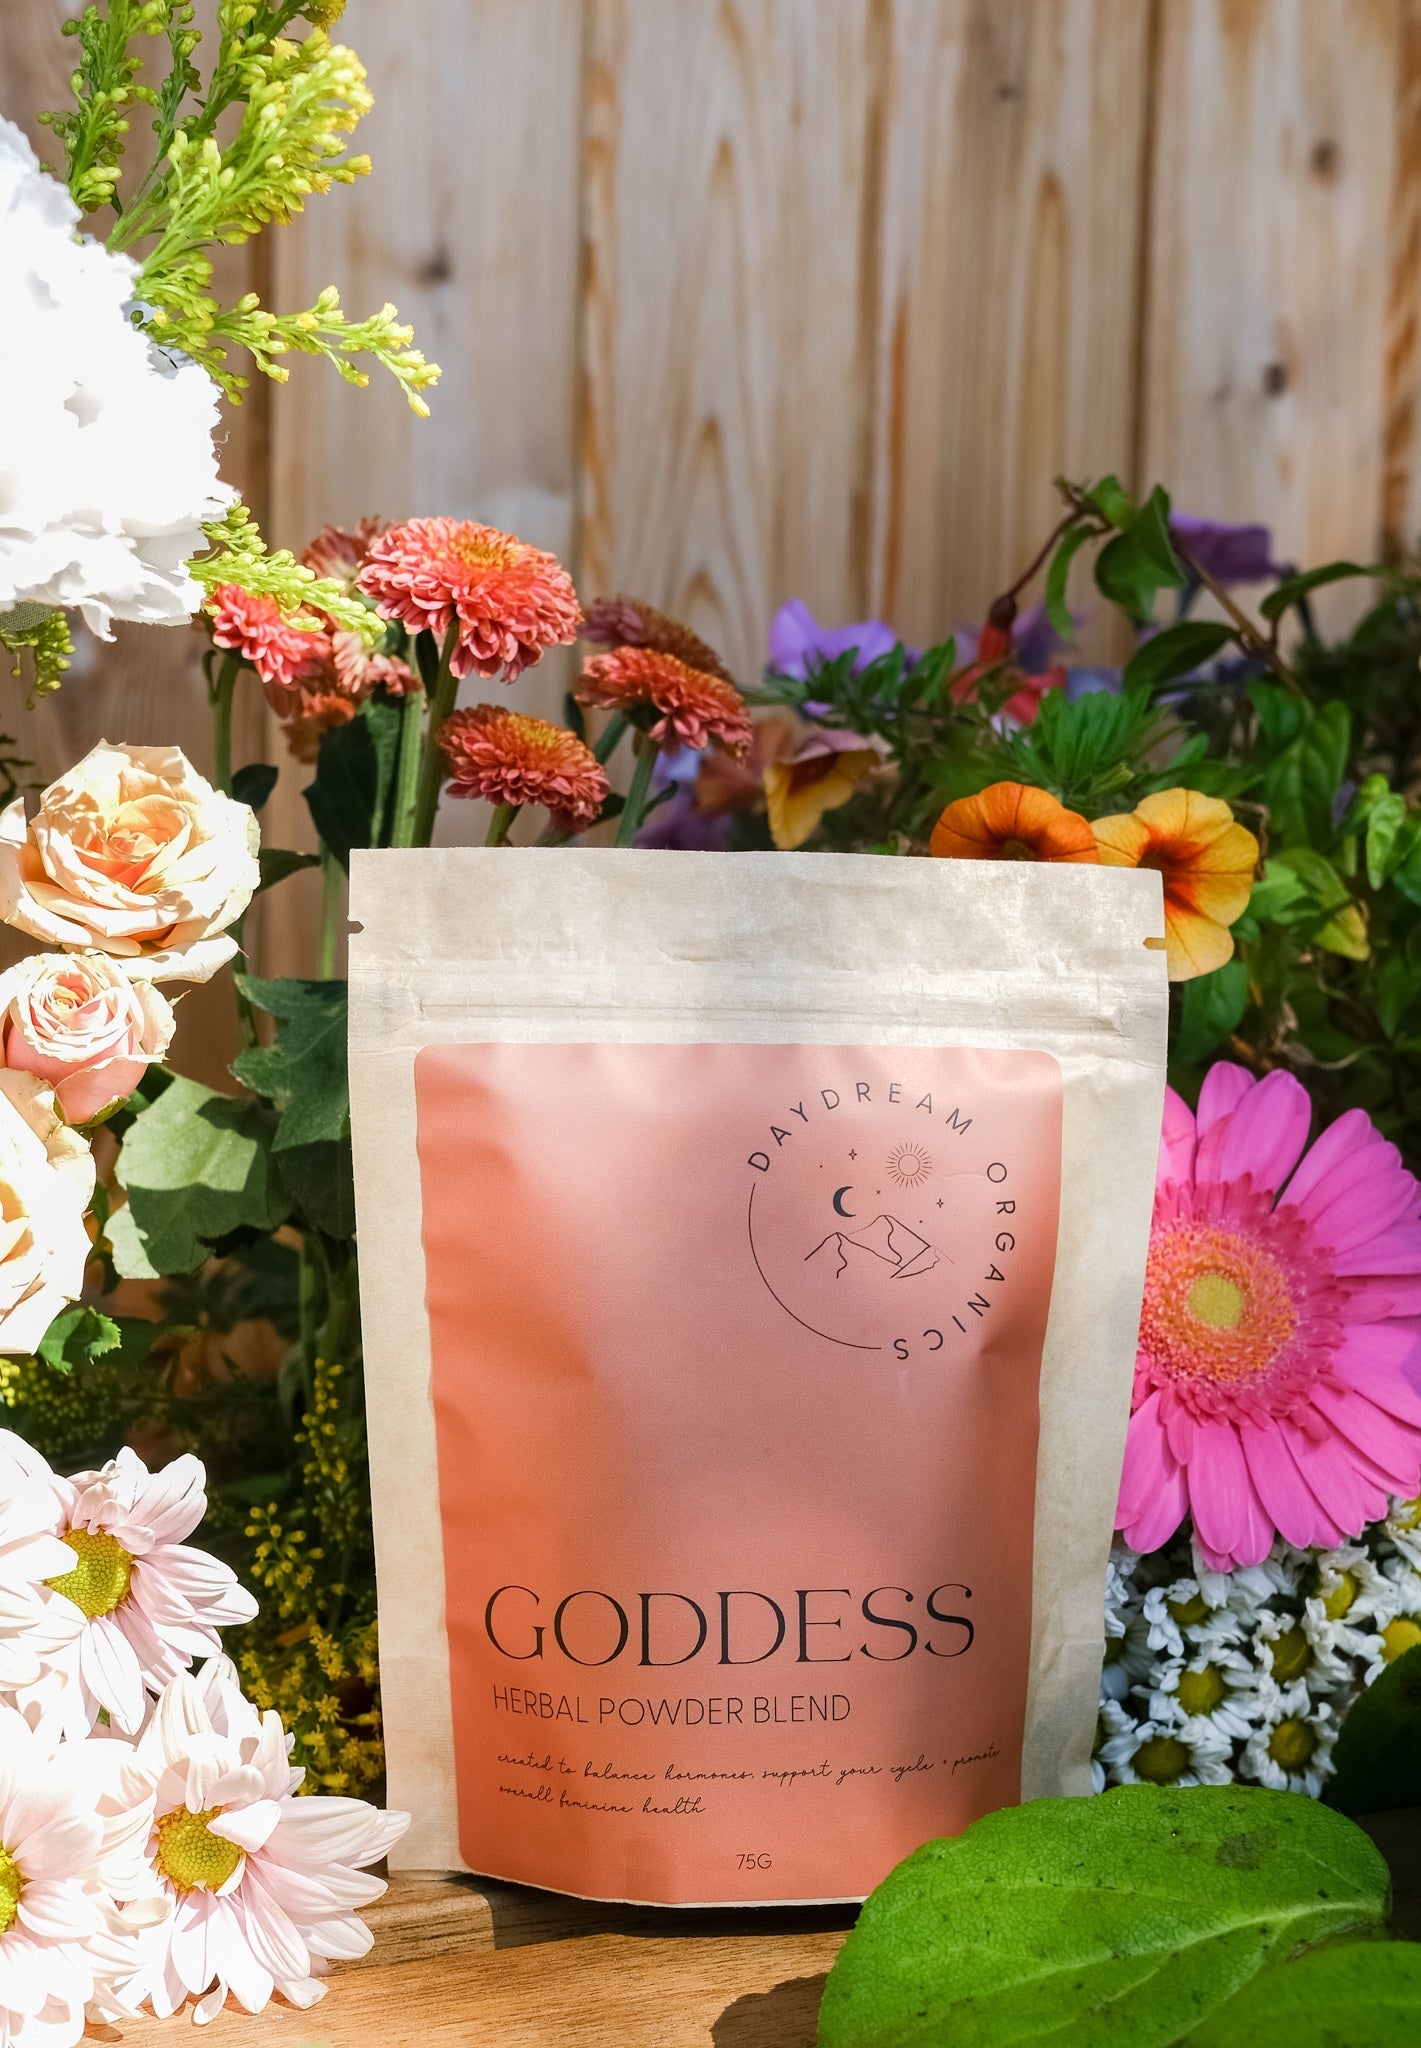 Say hello to your inner goddess with our Goddess herbal powder blend which has been formualted to help naturally balance hormone levels, balance your menstrual cycle, relieve menopause symptoms, and ease common PMS symptoms. 